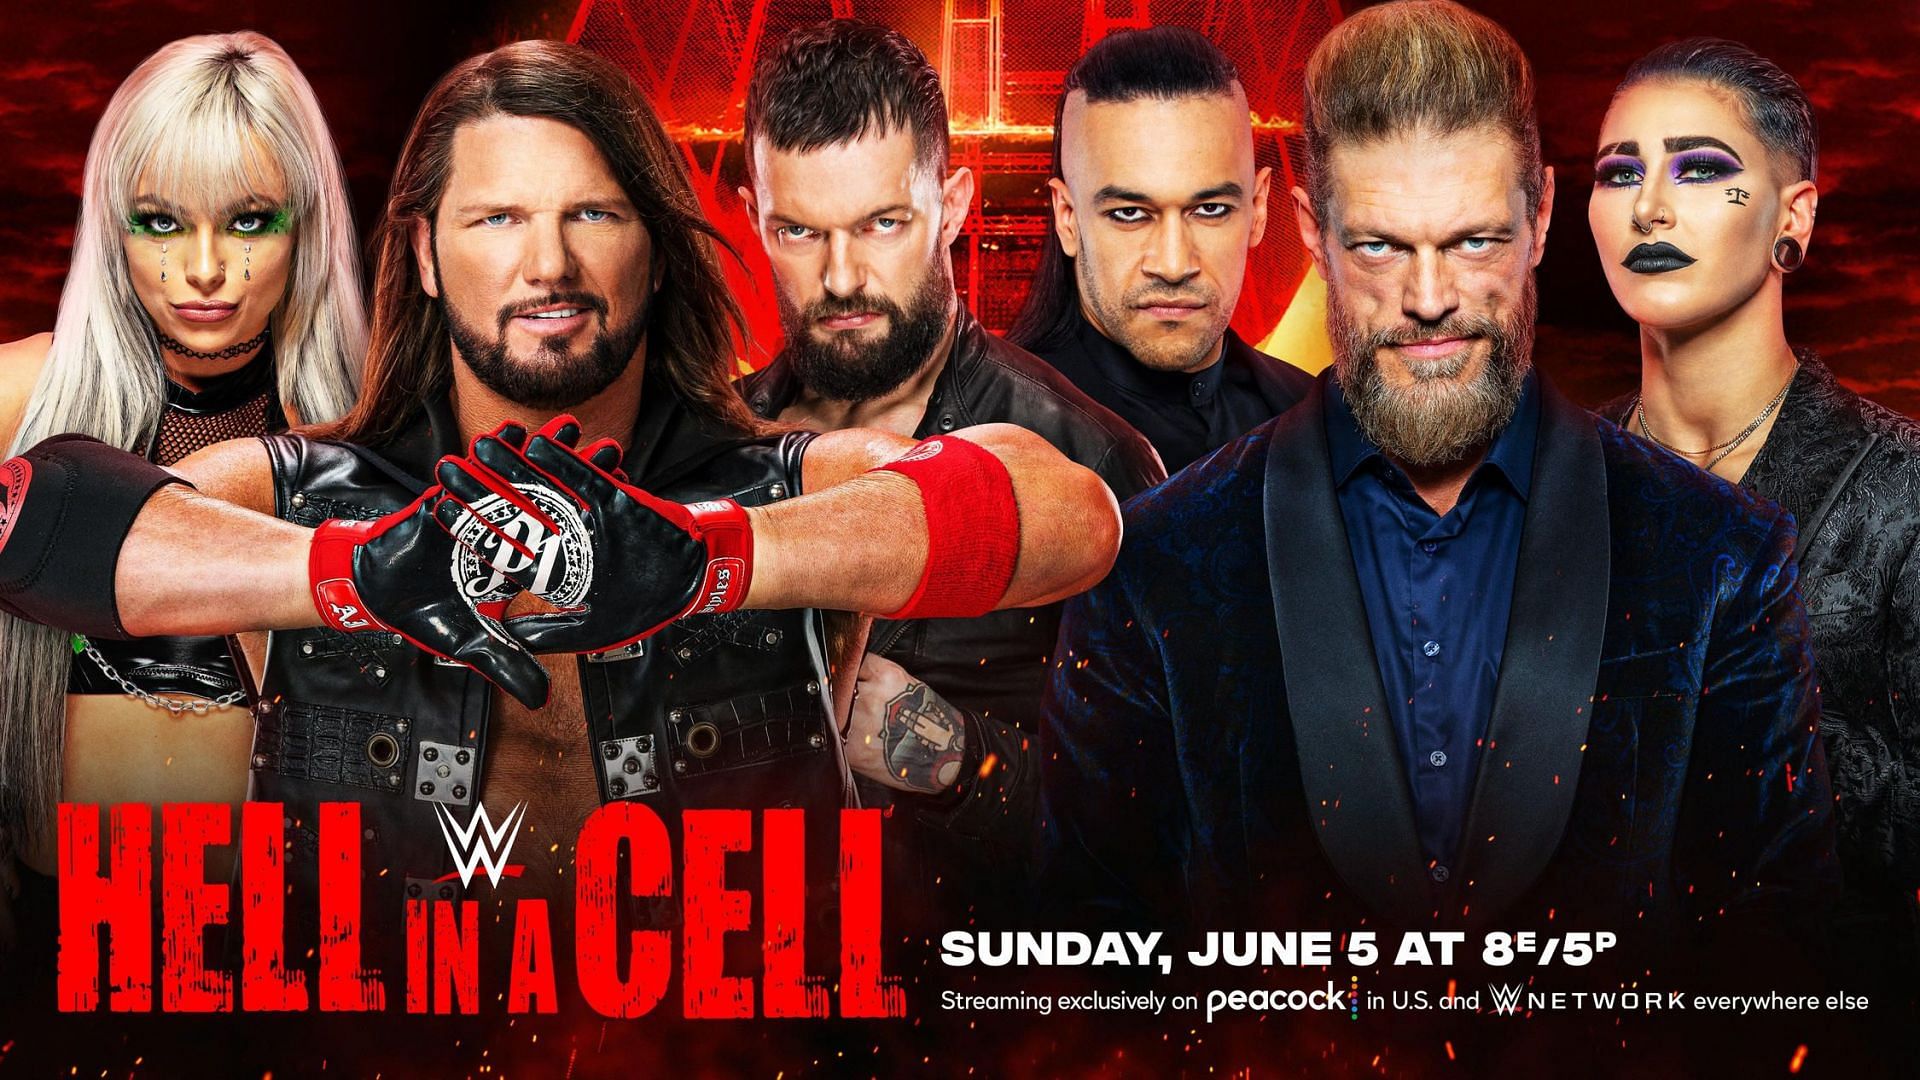 Huge match set for Hell in a Cell this Sunday